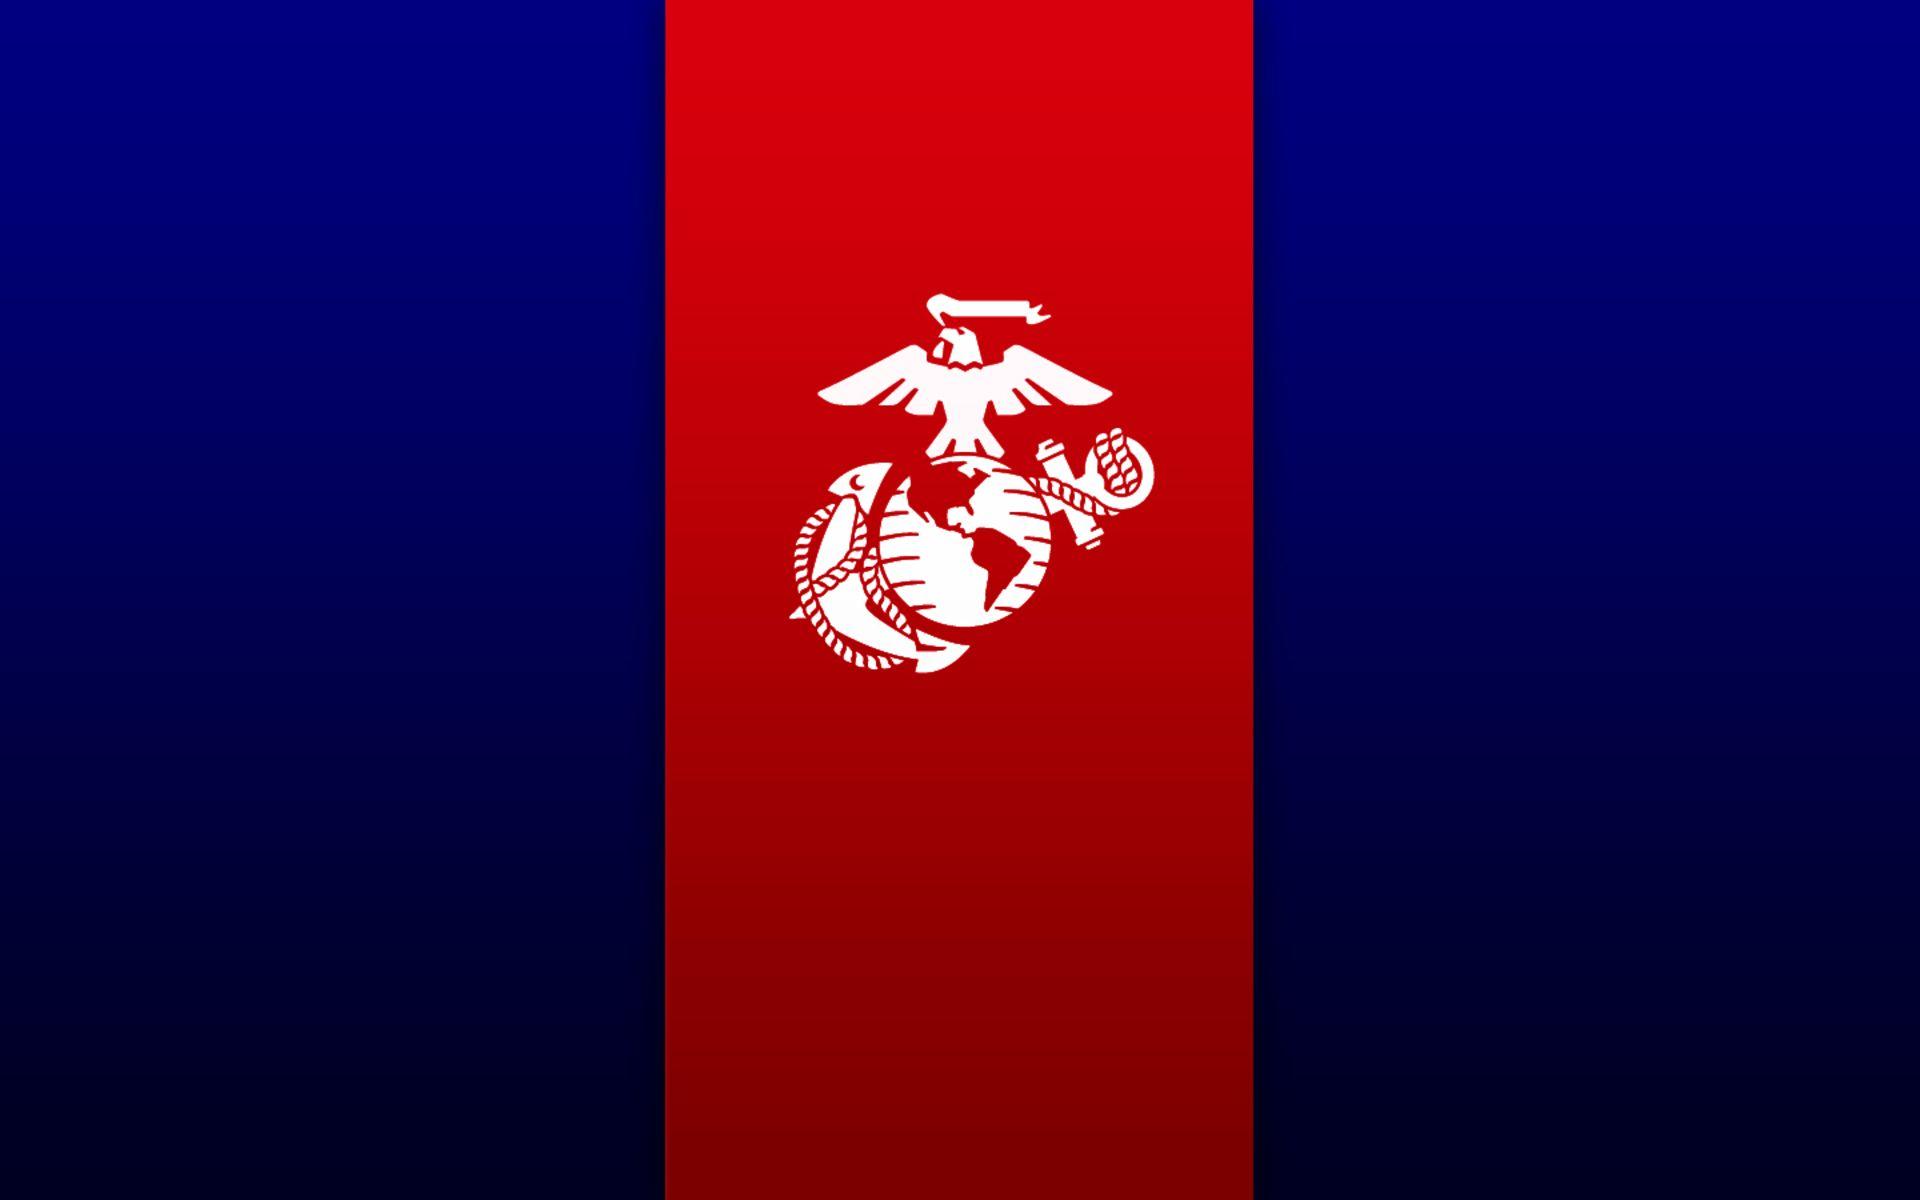 Red White Blue Military Logo - 1920x1440 Px HD Desktop Wallpaper : Wallpapers Usmc Red And Blue ...